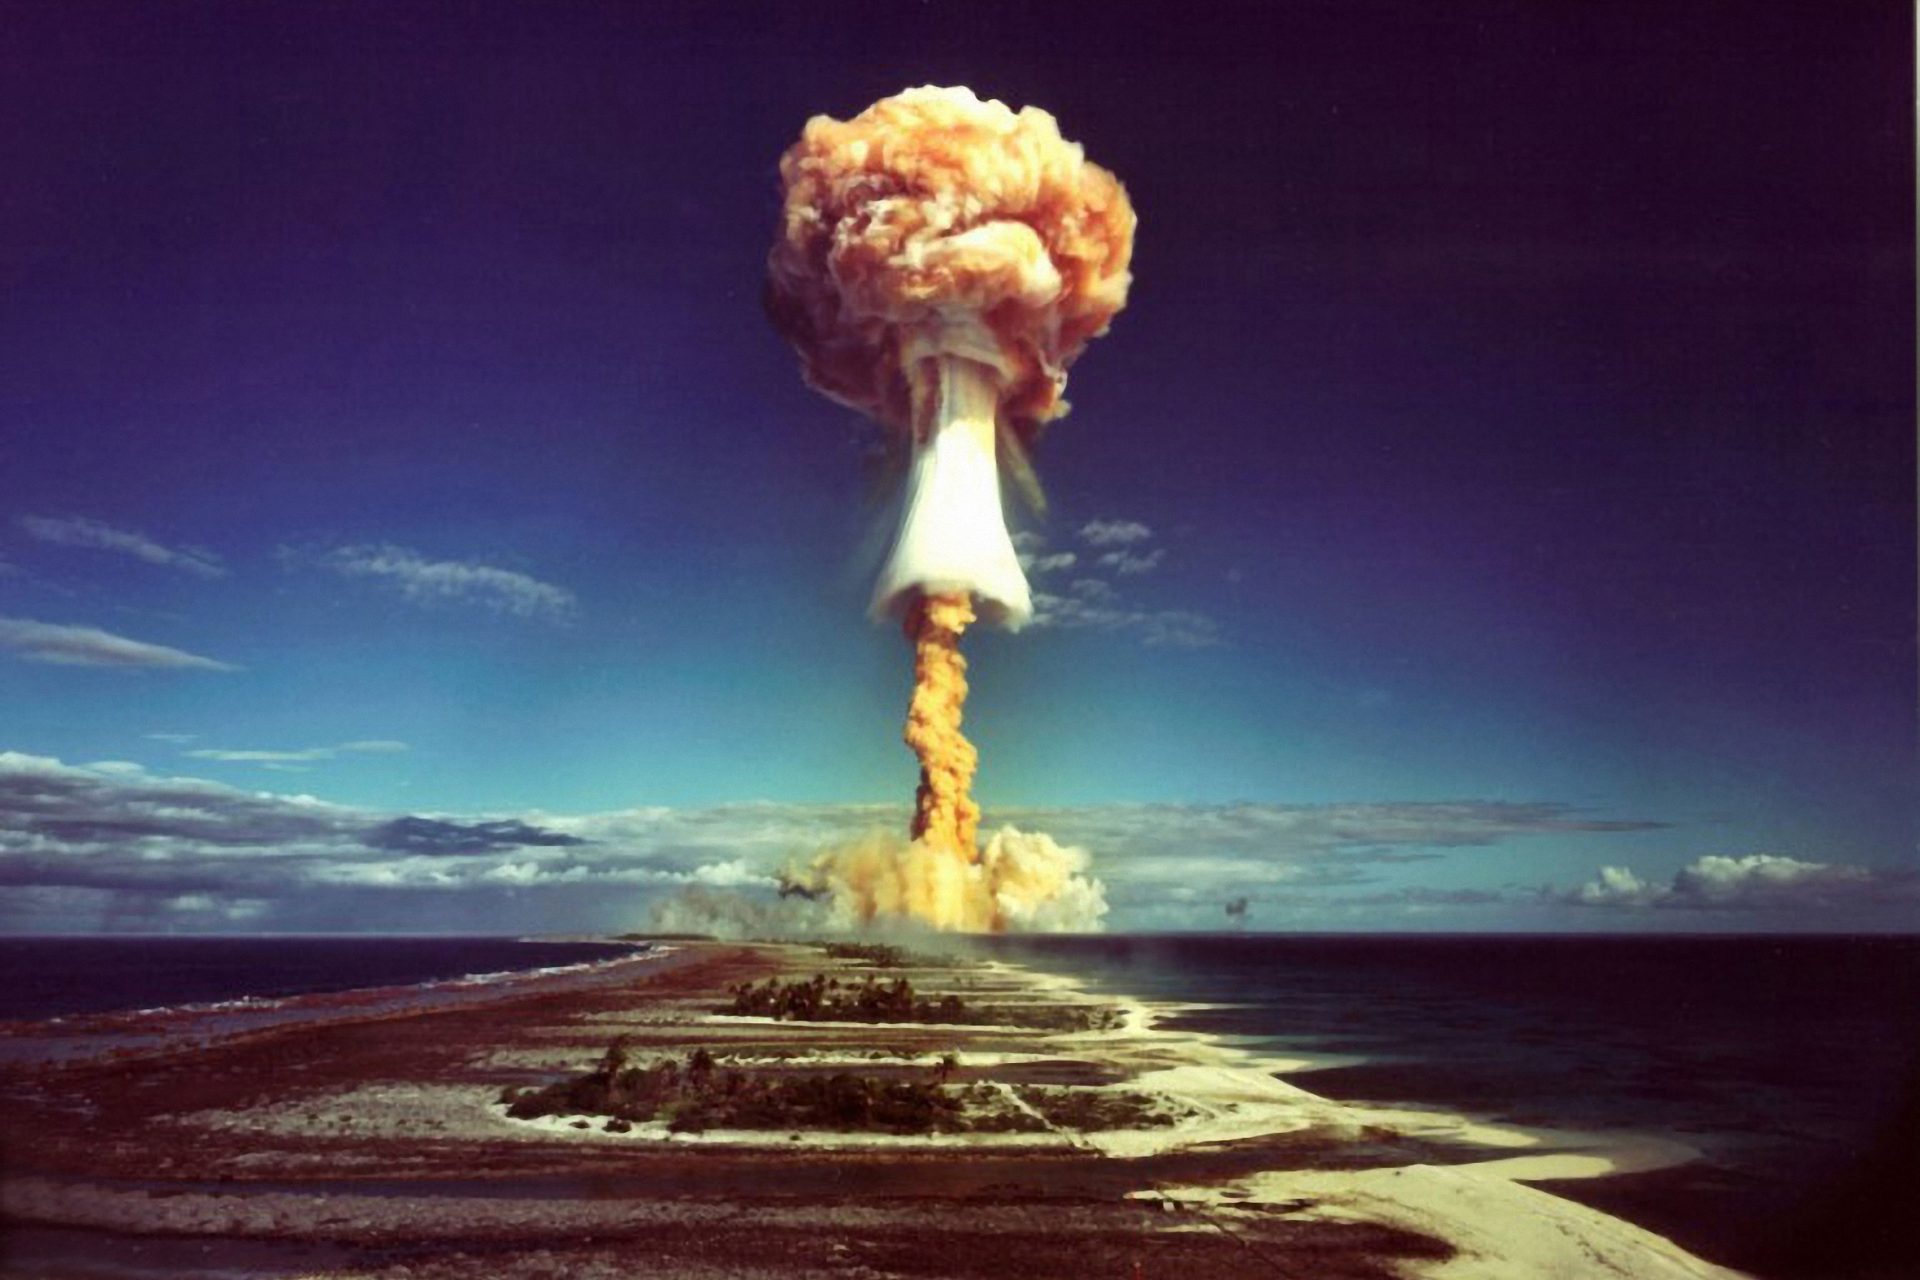 Have you ever wondered what it would be like to experience a nuclear explosion?